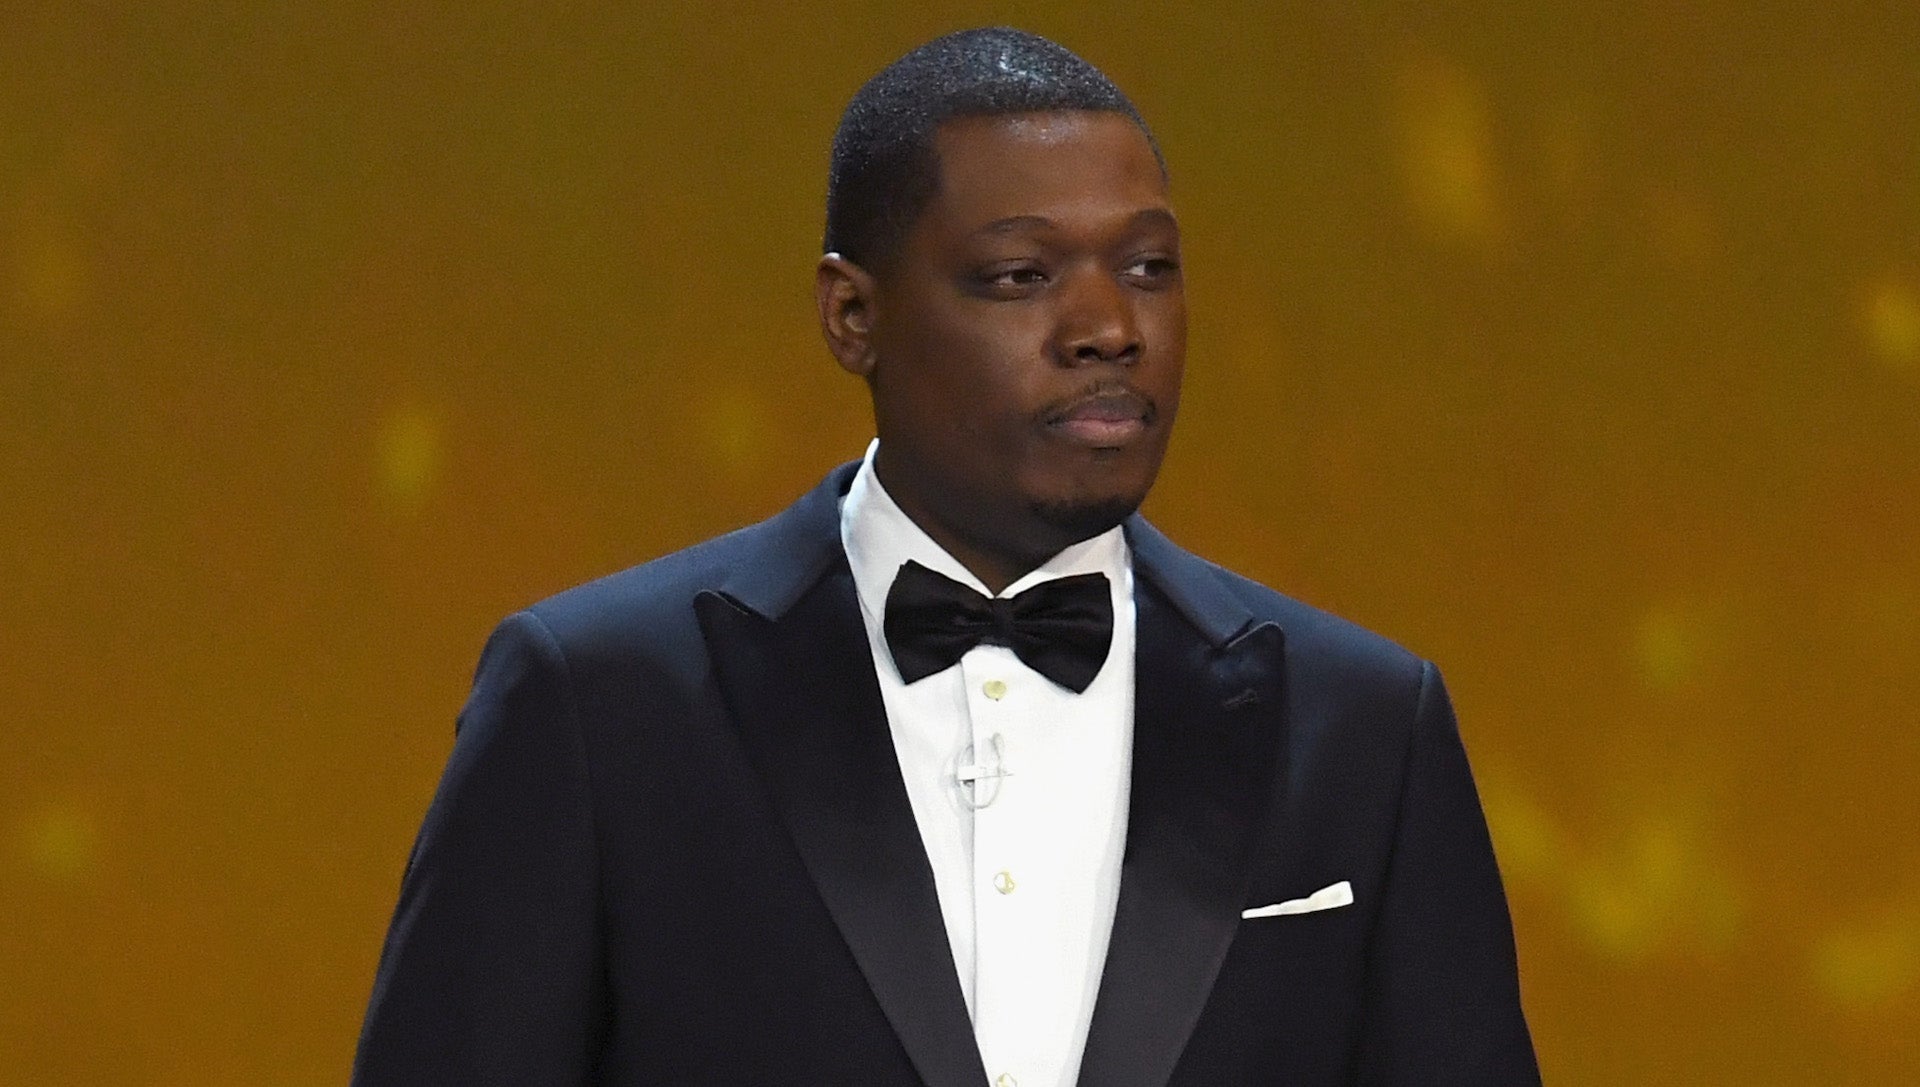 'Saturday Night Live' Star Michael Che Loses Grandmother To COVID-19: 'I'm Just Mad'